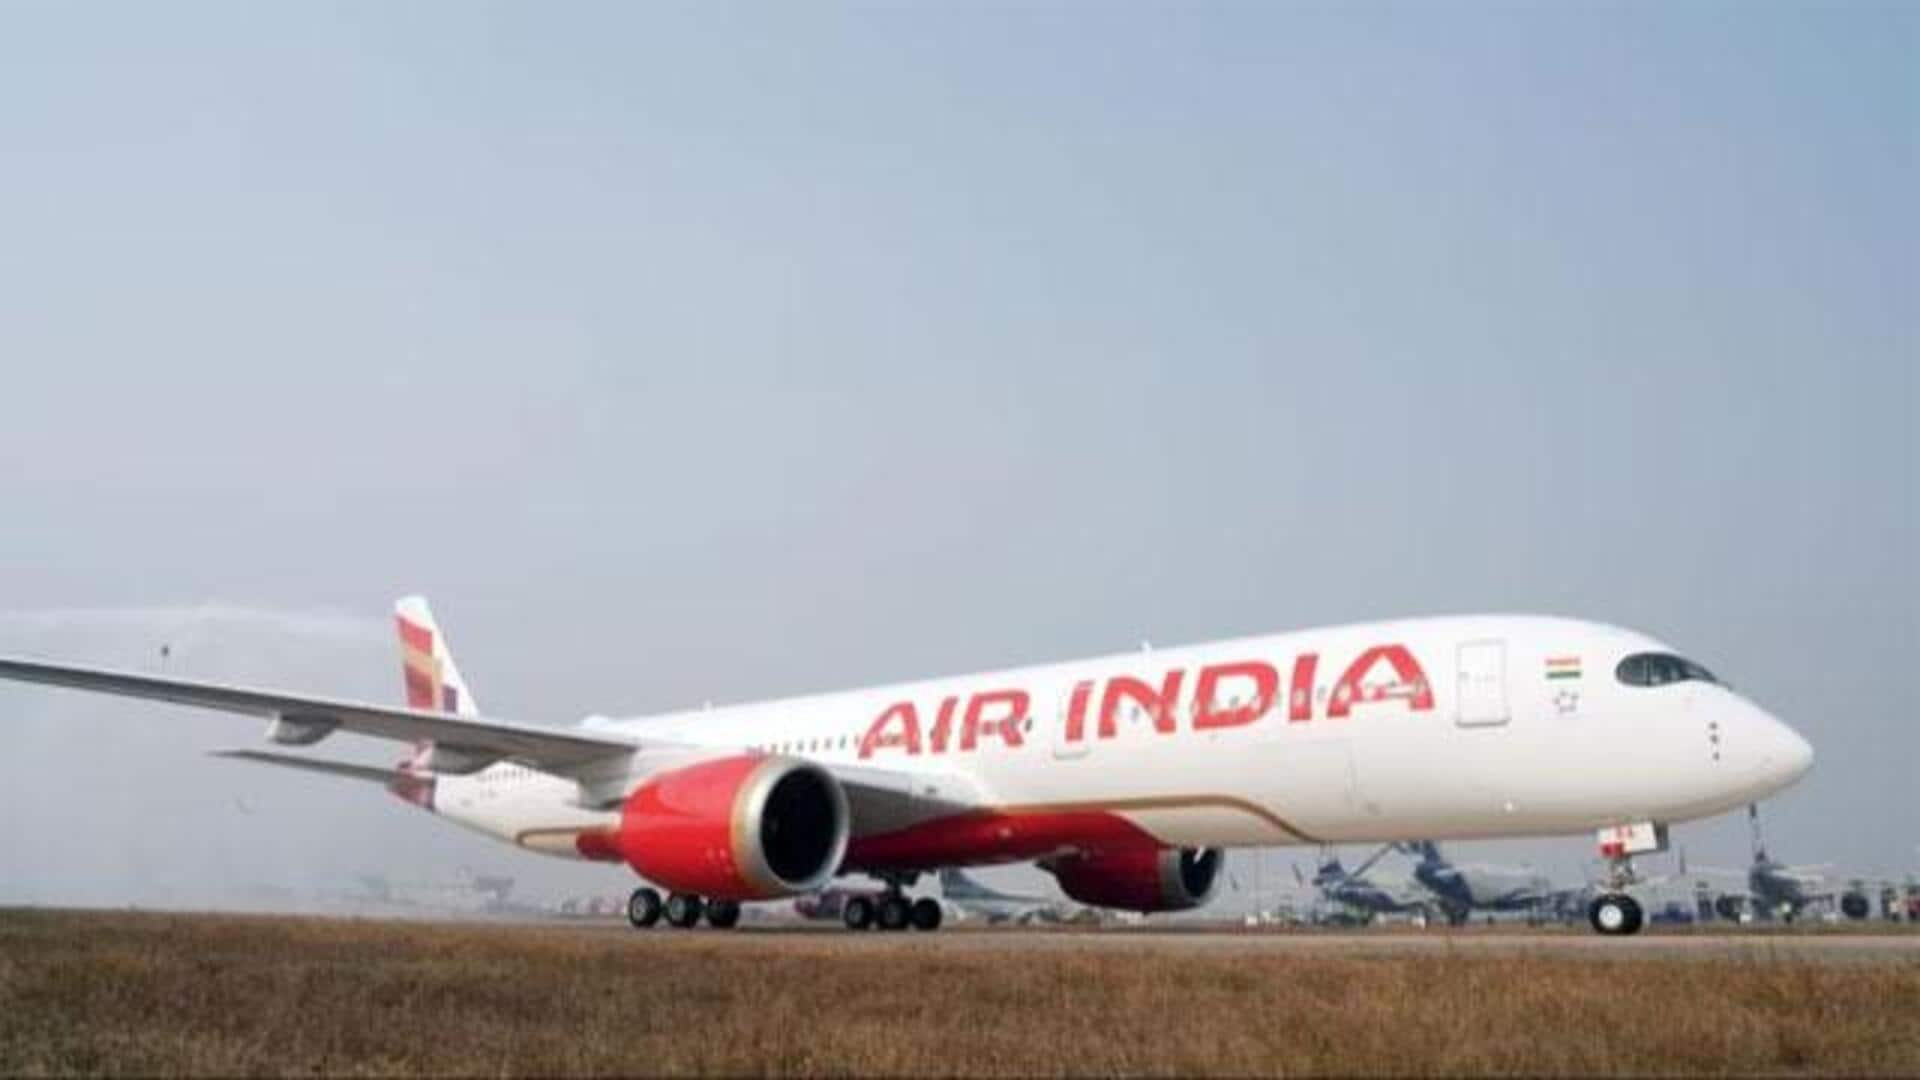 Air India launches maiden Airbus A350-900 flight: Details here